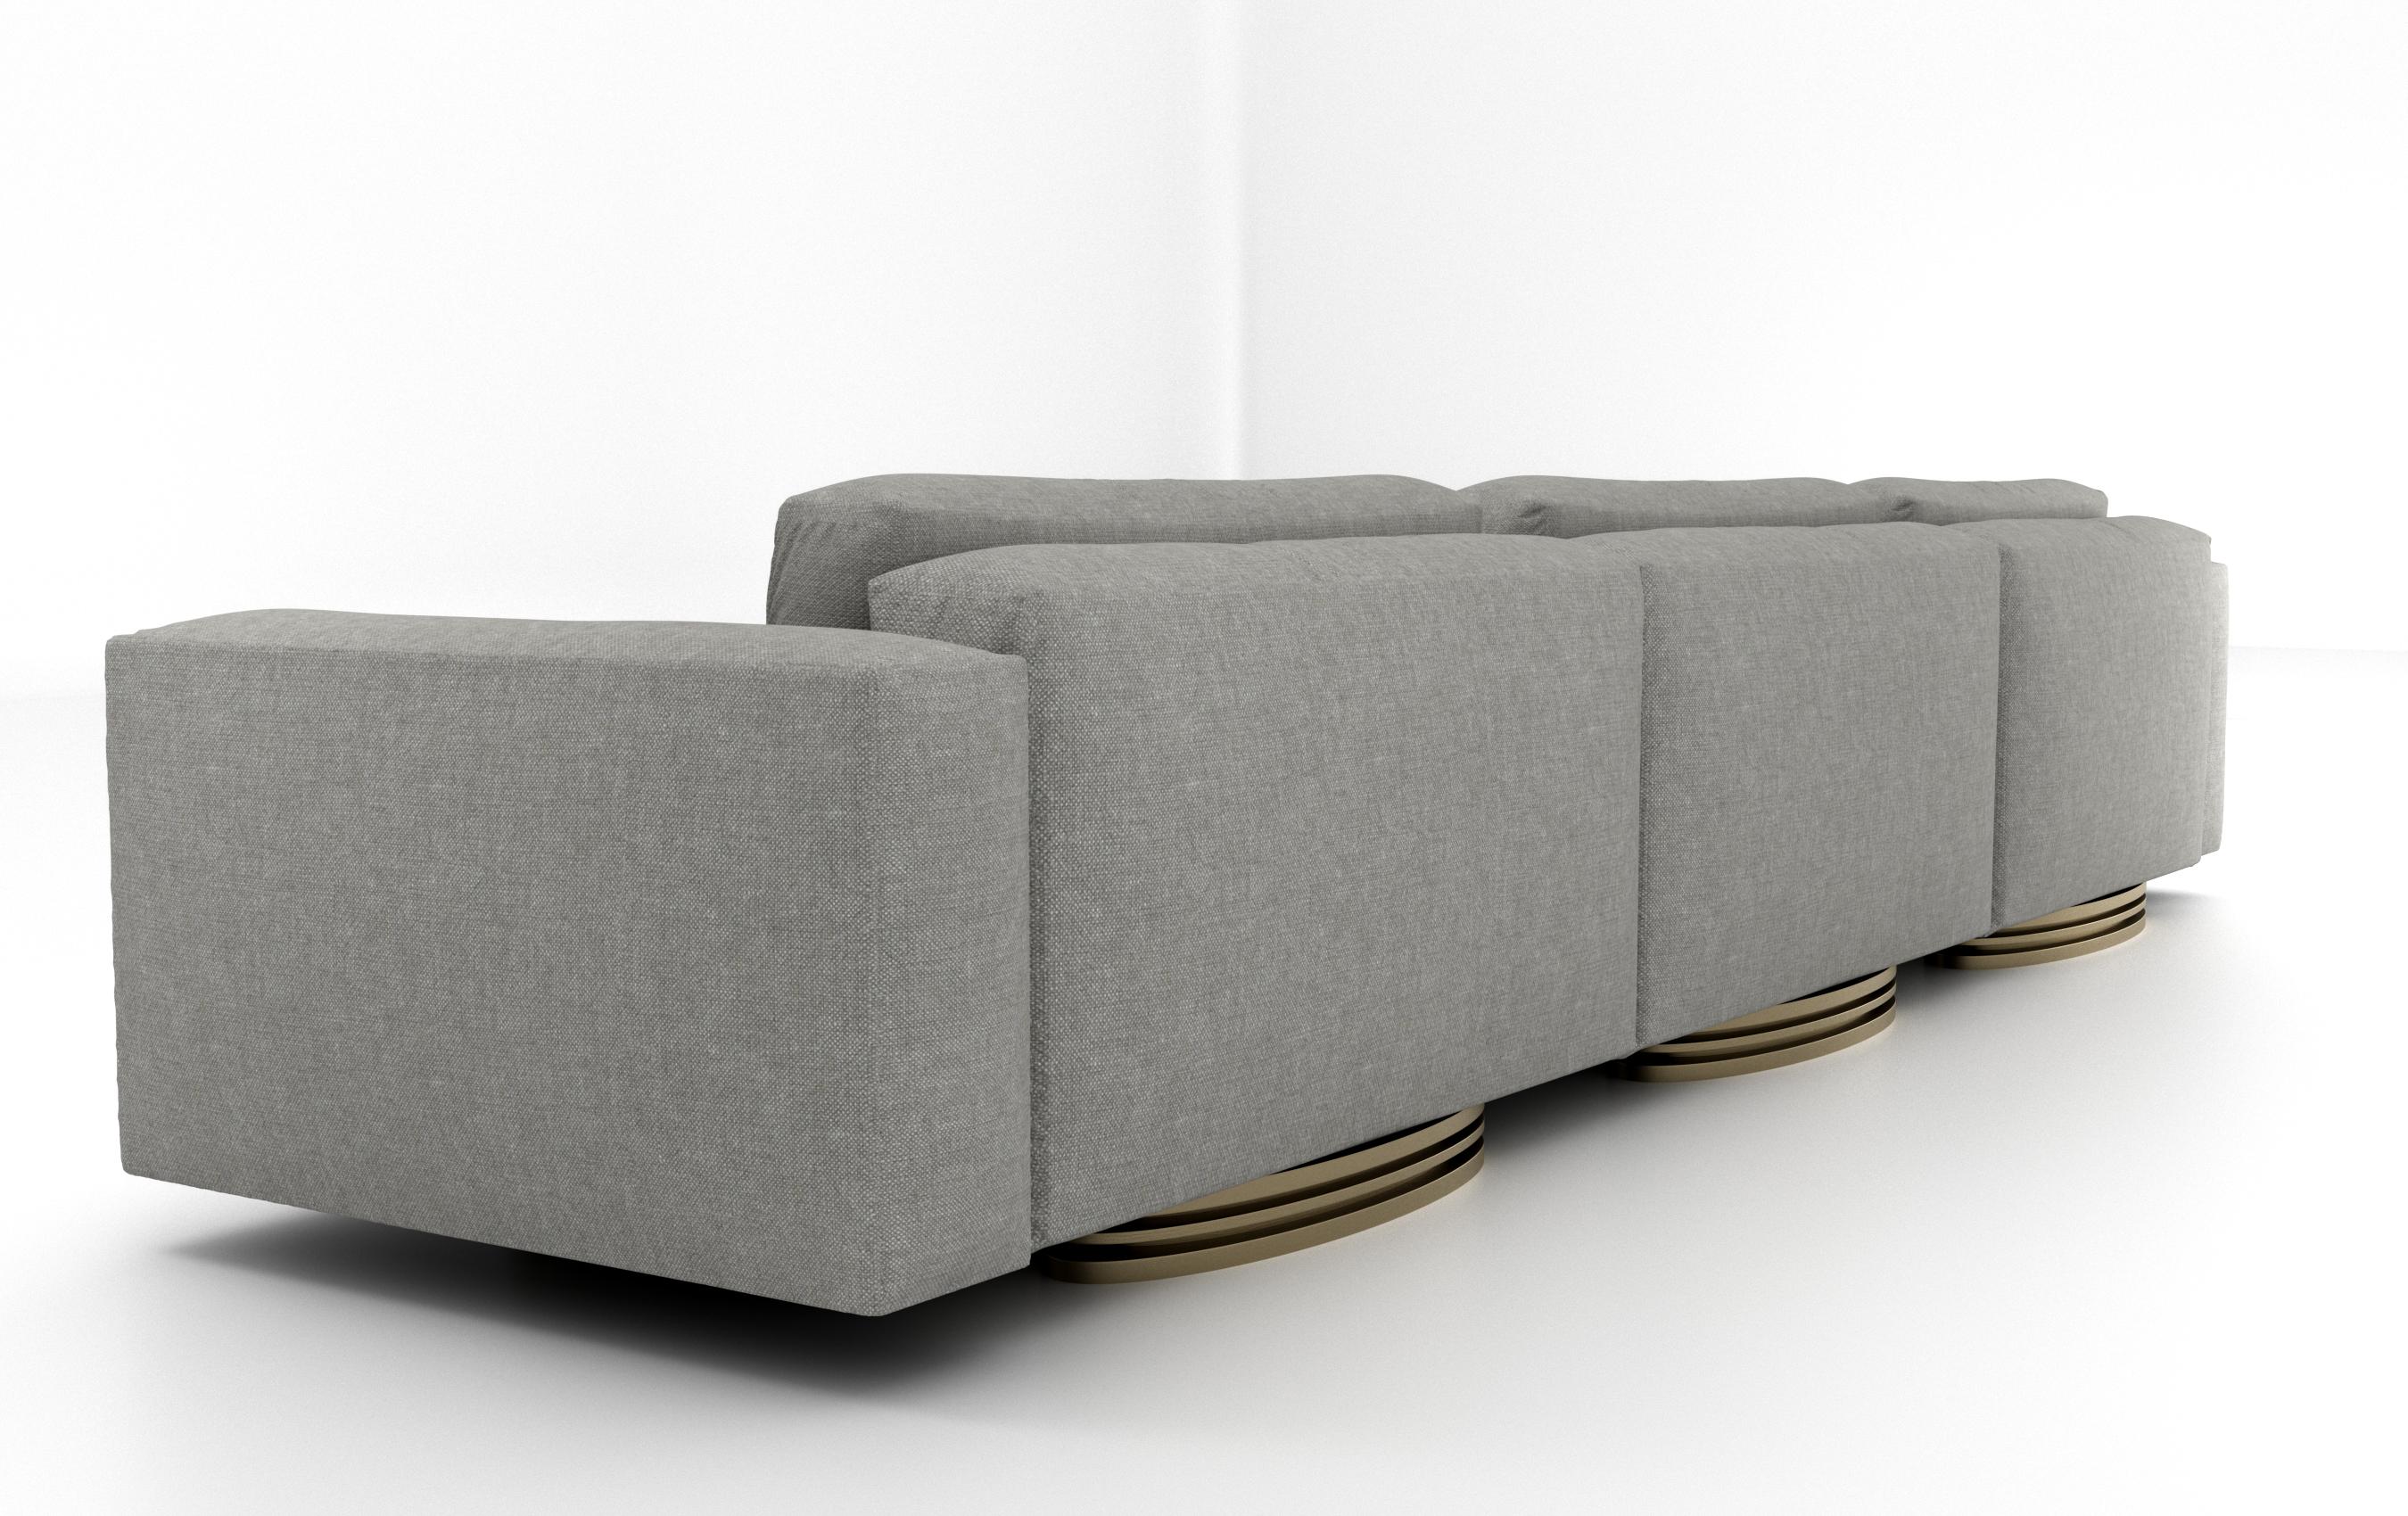 Appliqué BOLSA SECTIONAL CHASE - Modern Design in Cotton with Metallic High Gloss Bases